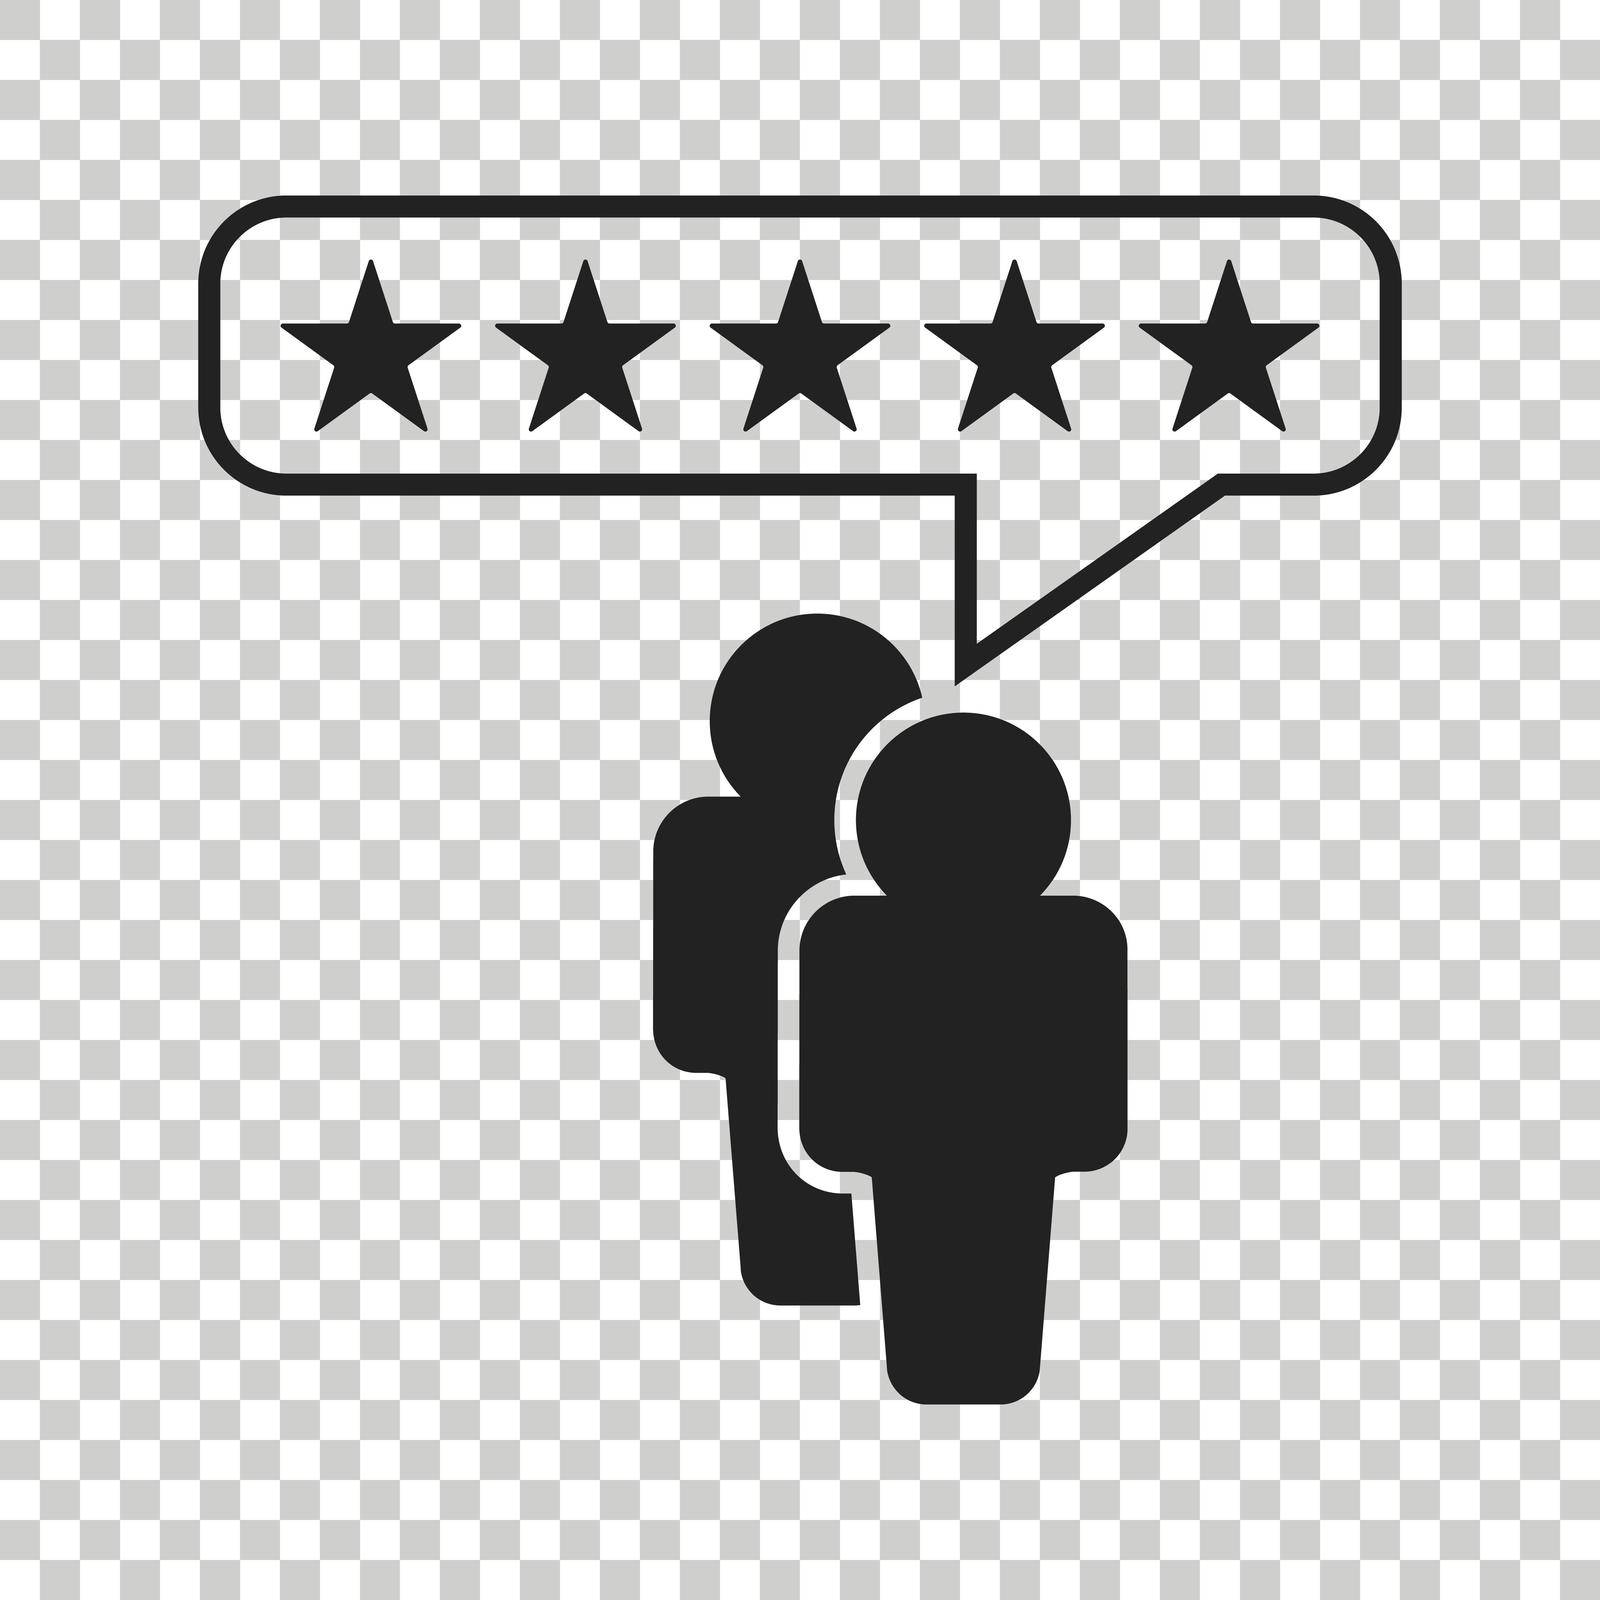 Customer reviews, rating, user feedback concept vector icon. Flat illustration on isolated background.